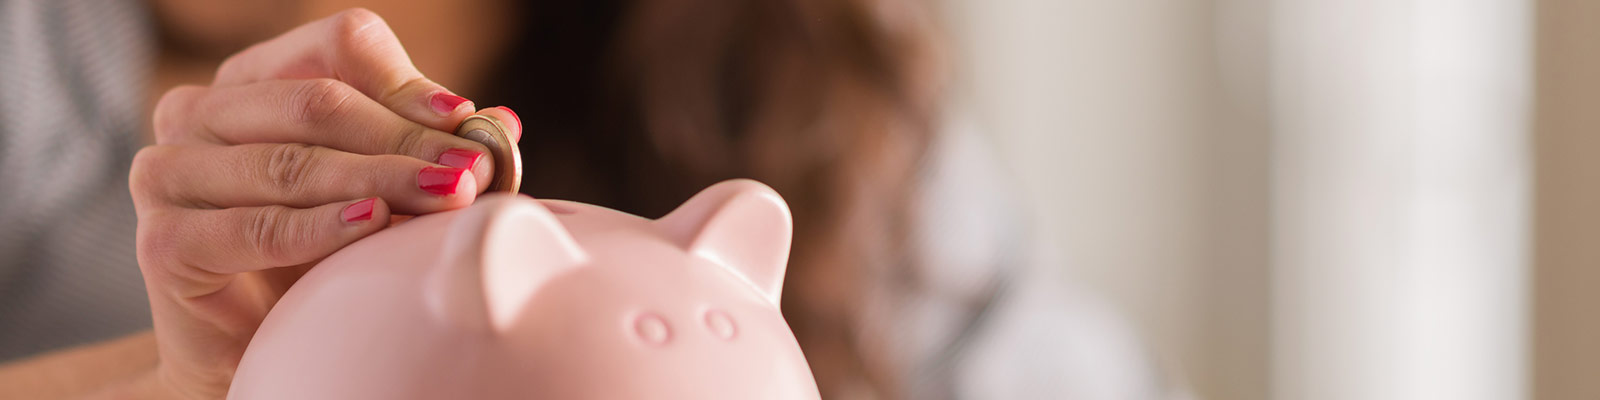 a person placing money in a piggy bank